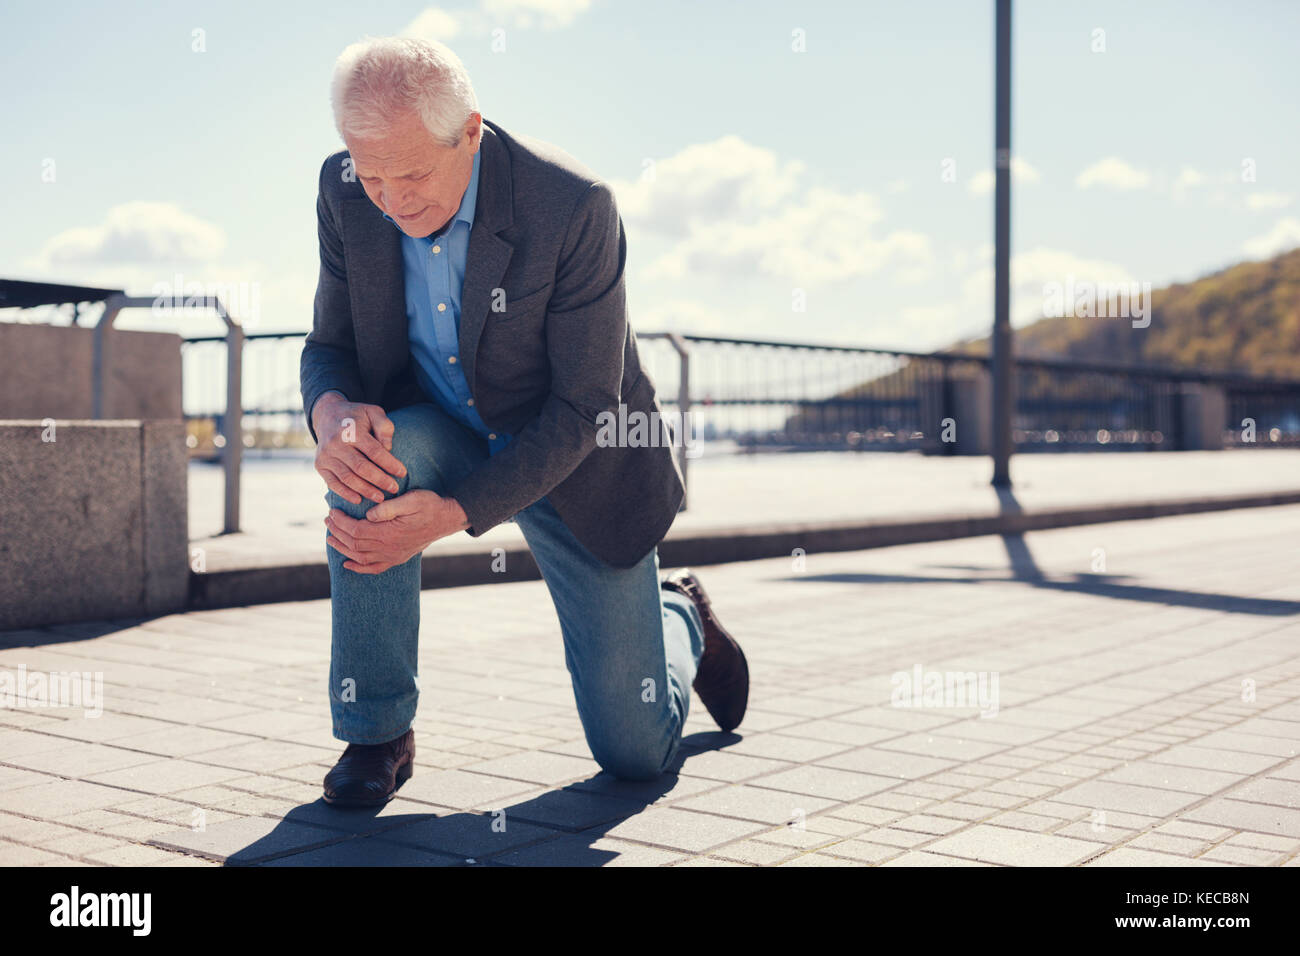 Well-dressed senior man feeling his knee after falling Stock Photo